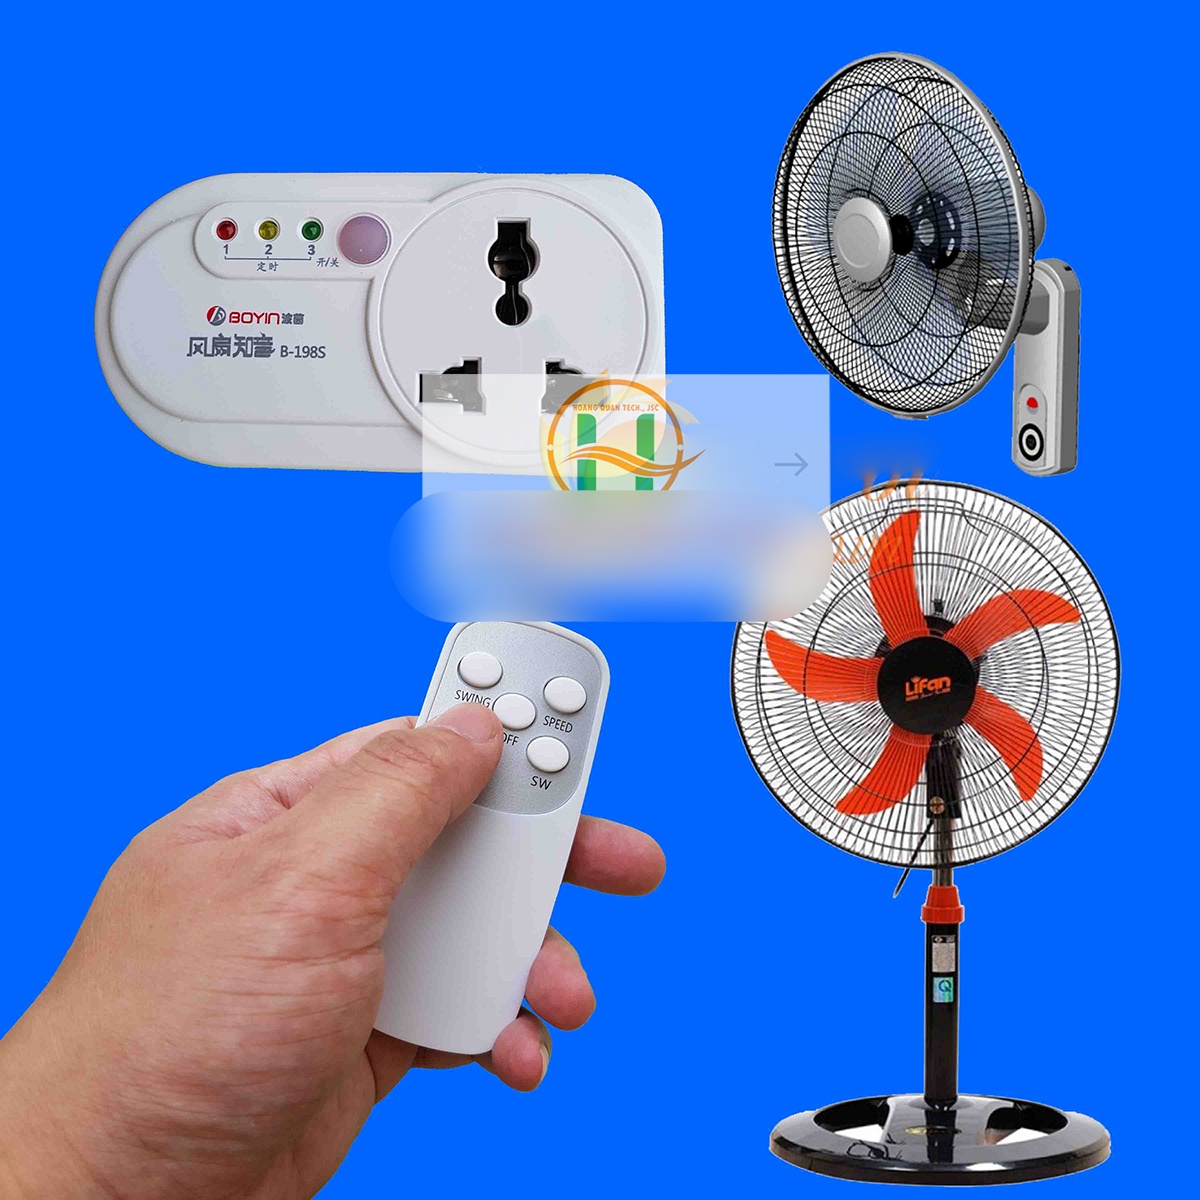 The device turns a regular fan into a remote-controlled smart fan, priced at less than 100K - Photo 2.